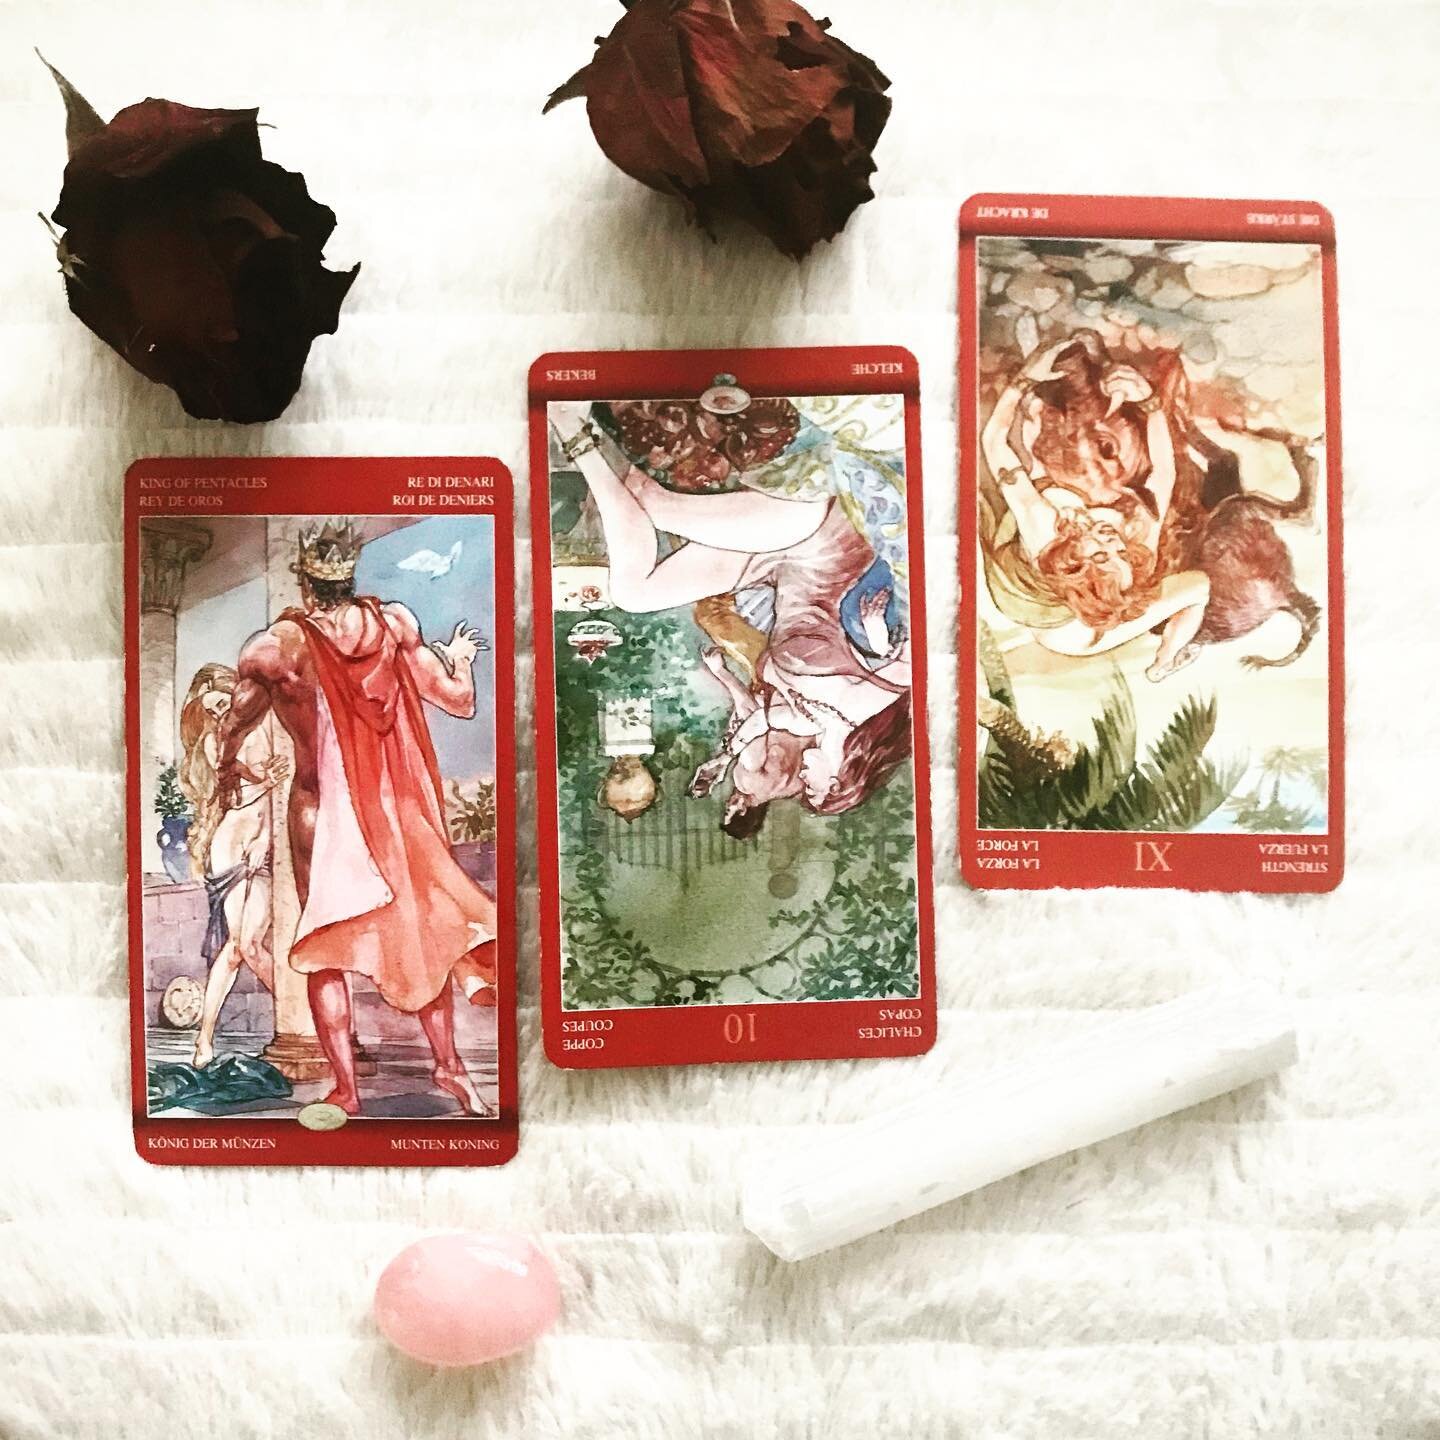 ✨Messages for Week Ahead✨
Slow and steady wins the race is the motto for the week. 
As we start the week with Moon entering the dutiful and responsible sign of Capricorn, we feel like we have to put aside some of our fun time and focus on the serious